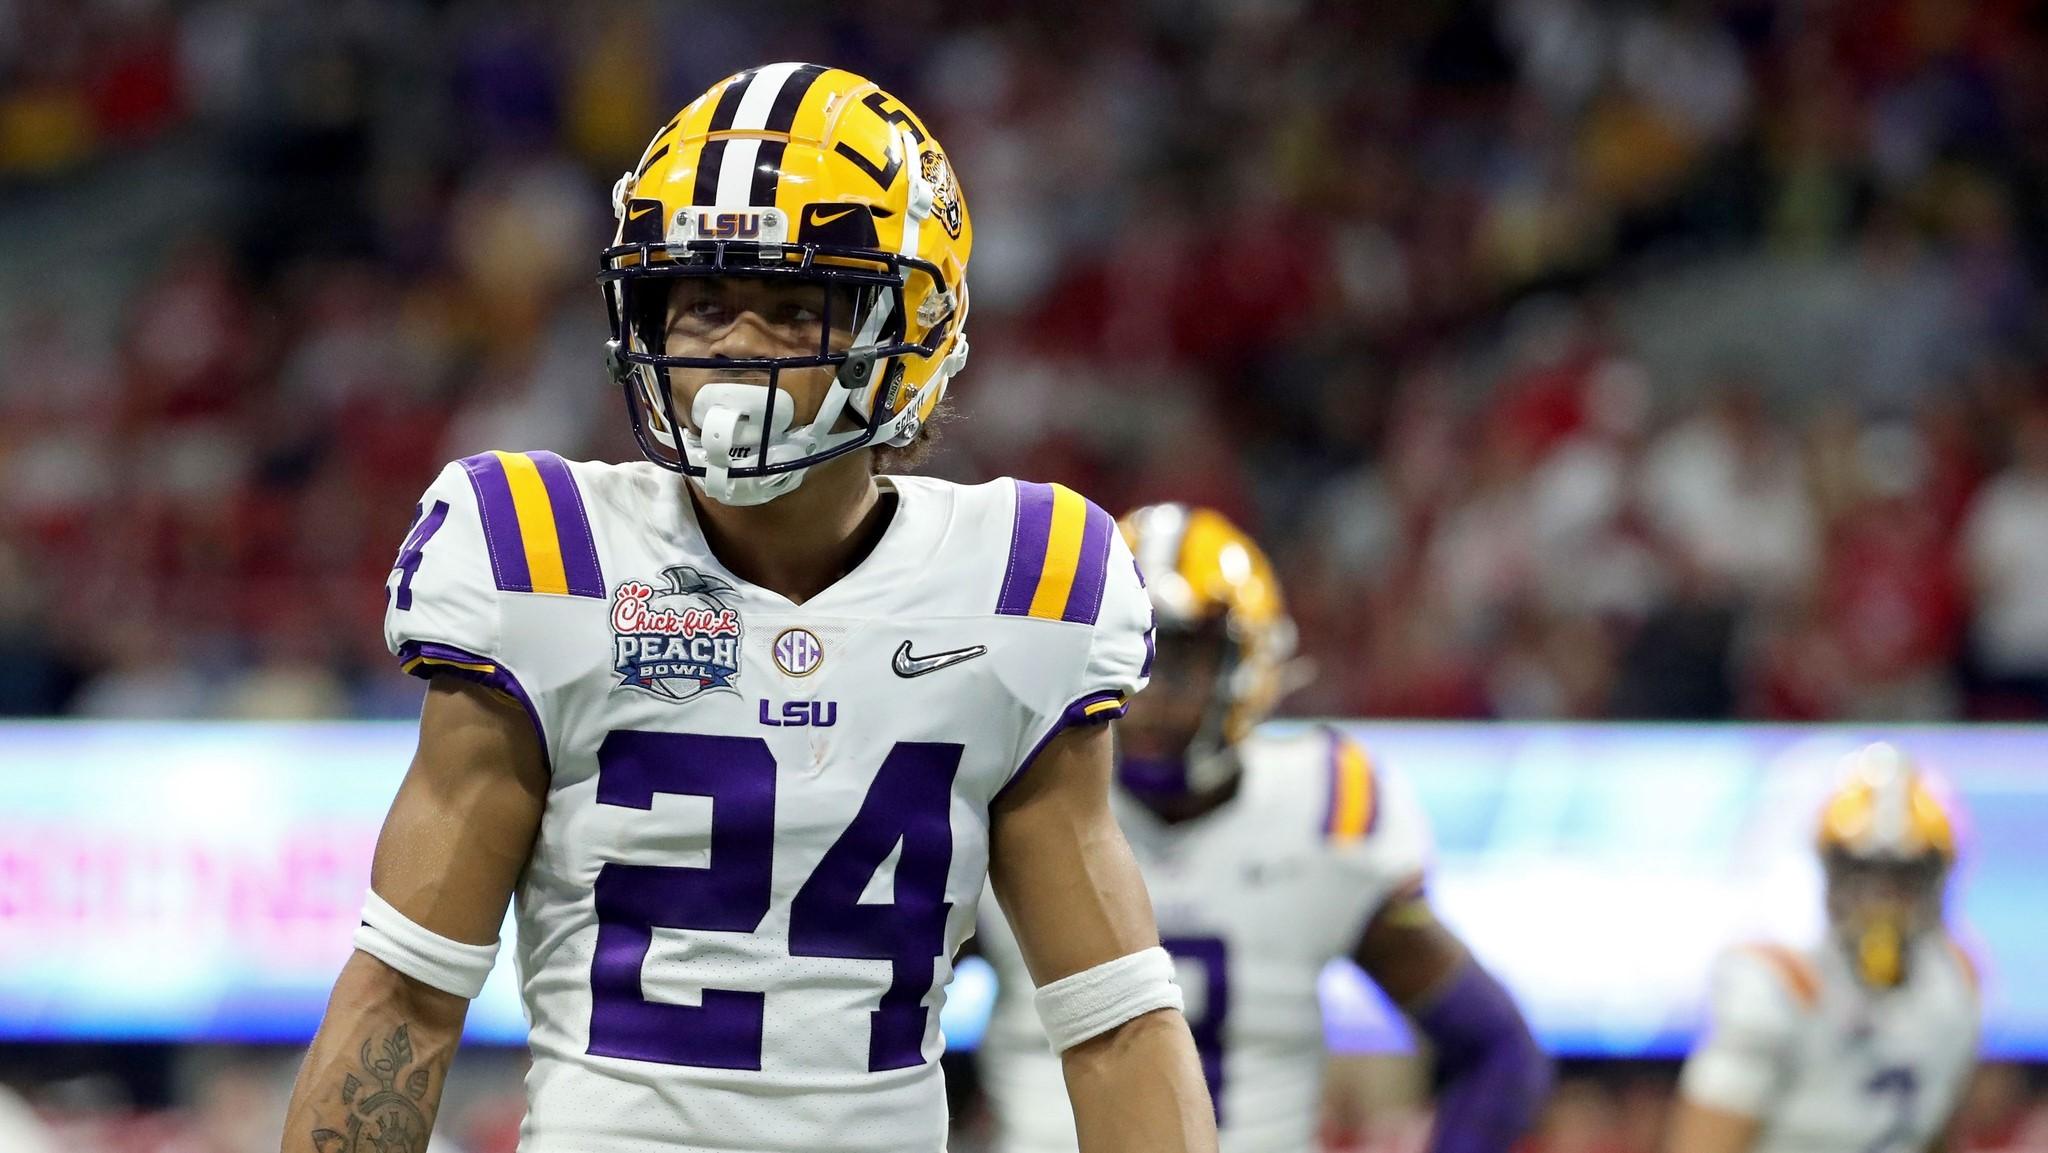 Dec 28, 2019; Atlanta, Georgia, USA; LSU Tigers defensive back Derek Stingley Jr. (24) during the second half of the 2019 Peach Bowl college football playoff semifinal game against the Oklahoma Sooners at Mercedes-Benz Stadium. / Jason Getz-USA TODAY Sports